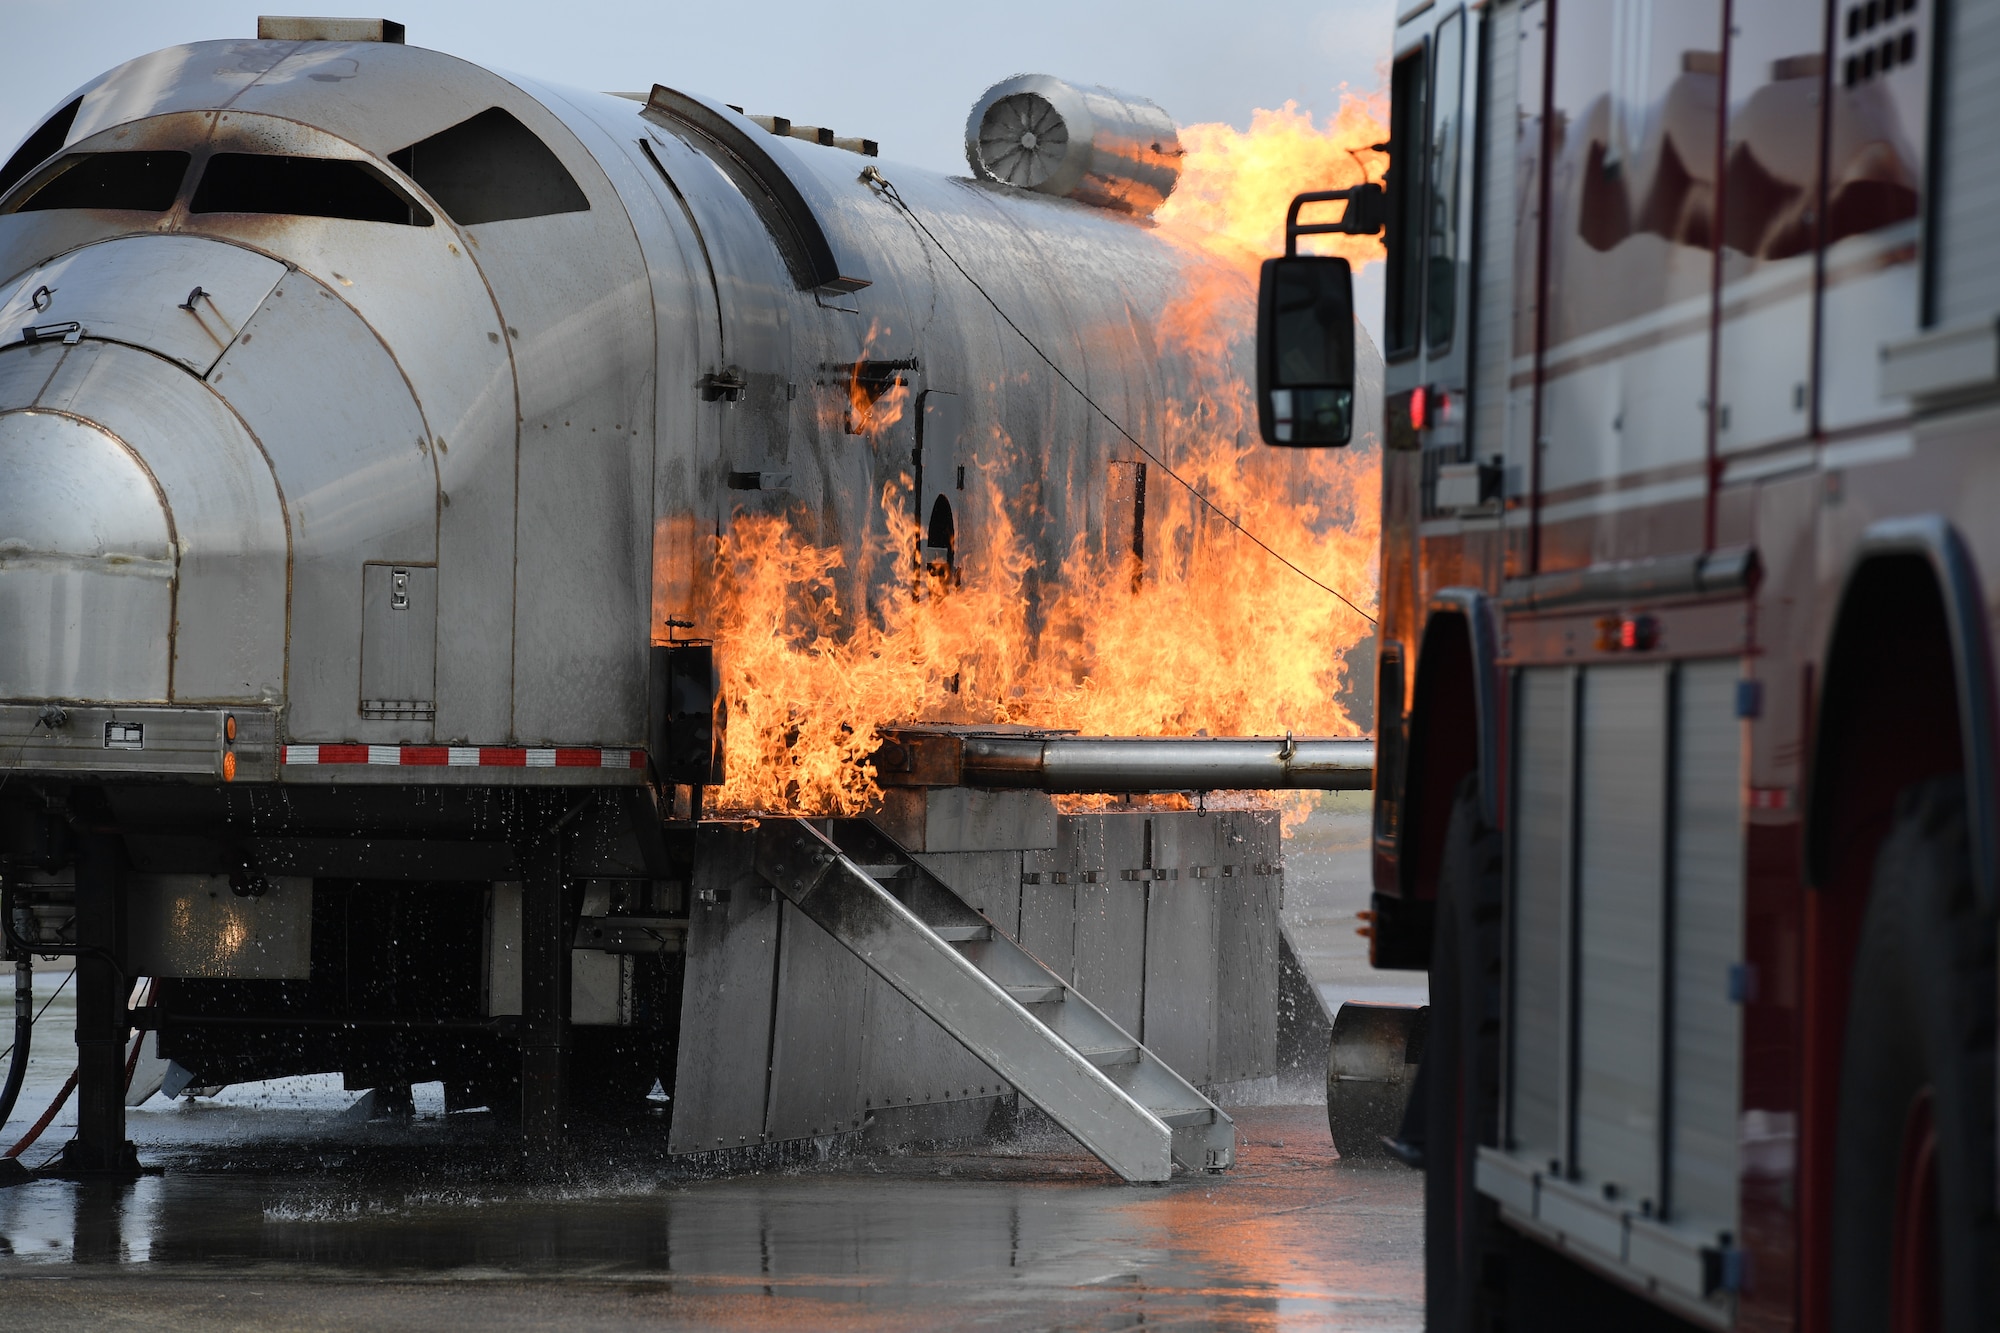 A Keesler fire truck is used to extinguish a fire on a mock C-123 training device during an aircraft rescue fire fighting training on Keesler Air Force Base, Mississippi, June 4, 2019. The joint agency training allowed the Keesler Fire Department, Gulfport Combat Readiness Training Center Fire Department, Stennis Airport Fire Department and the U.S. Naval Air Station Pensacola Gulf Coast Fire Rescue to meet the semi-annual training requirement to practice aircraft rescue and live fire training evolutions. (U.S. Air Force photo by Kemberly Groue)